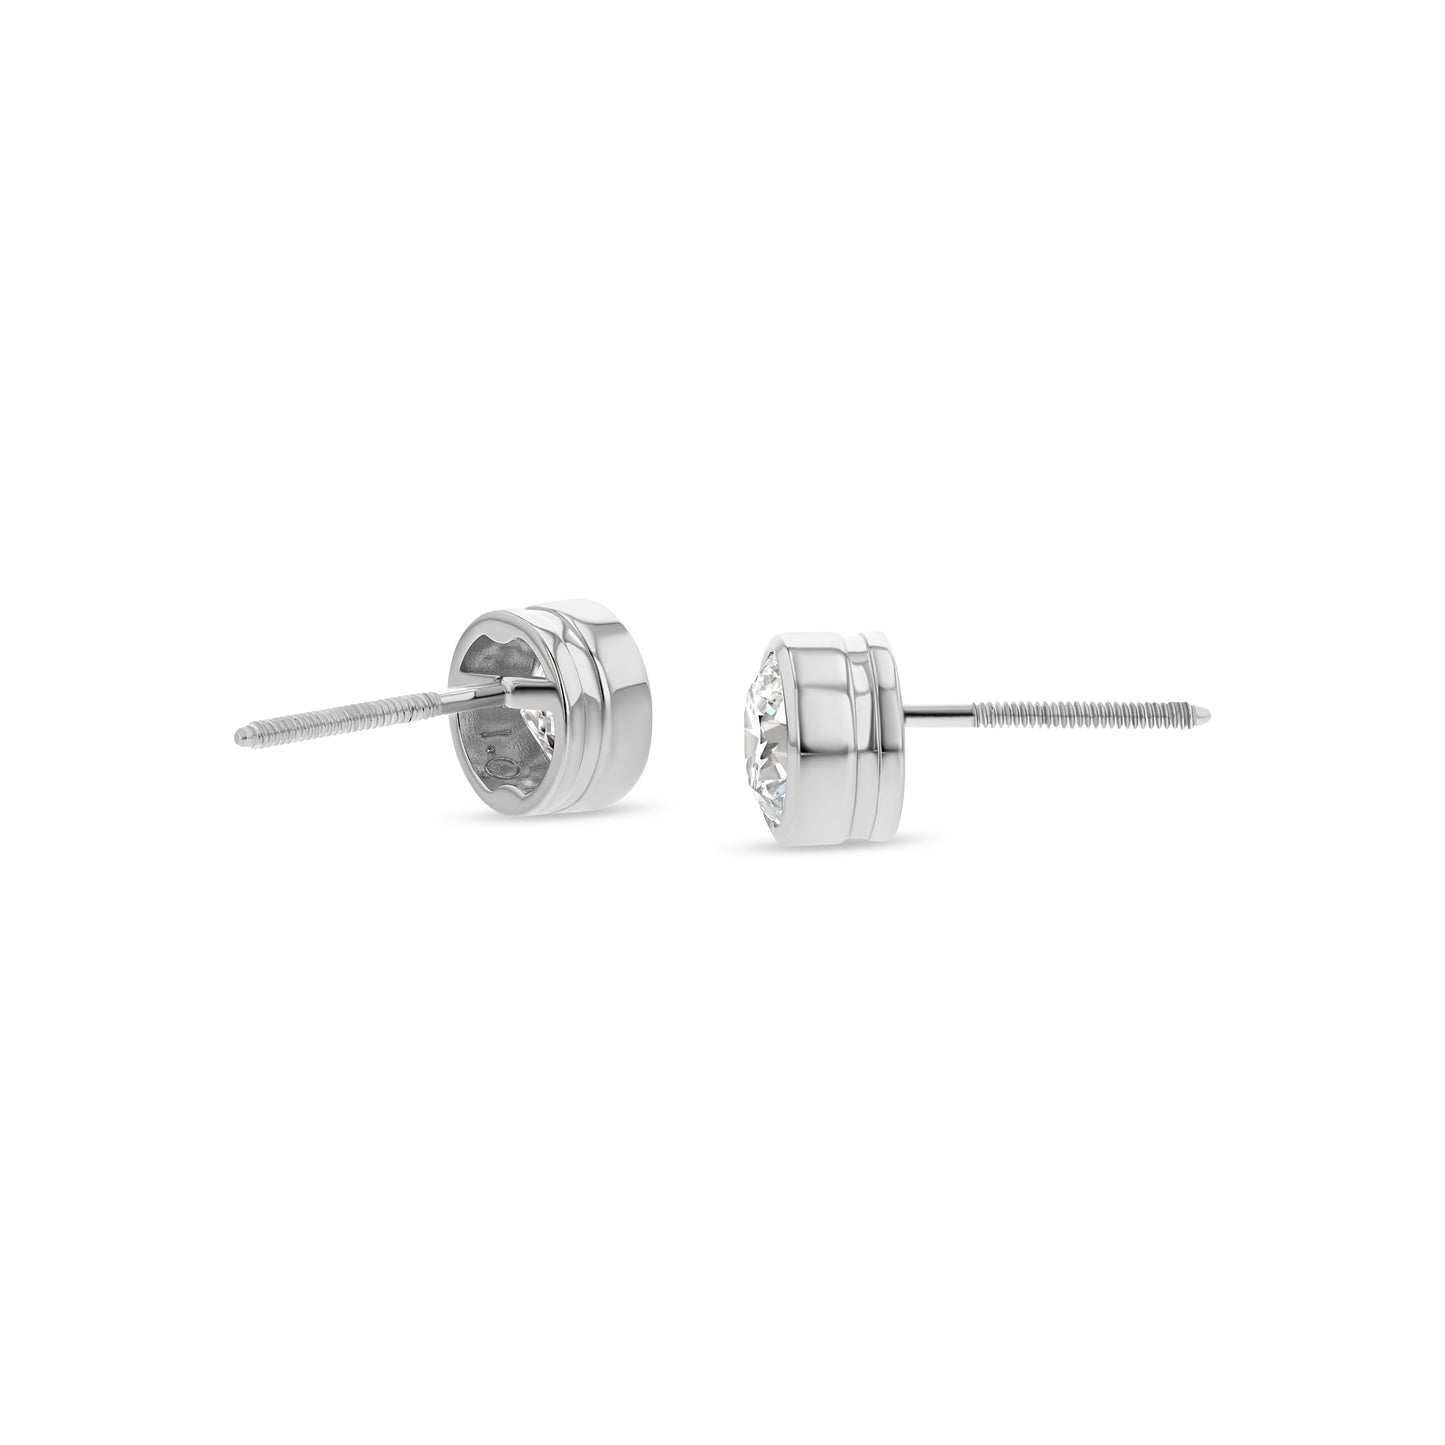 18k White Gold Bezel Round Diamond Stud Earrings 1/2ctw (4.1mm Ea), M-n Color, Si2-si3 Clarity